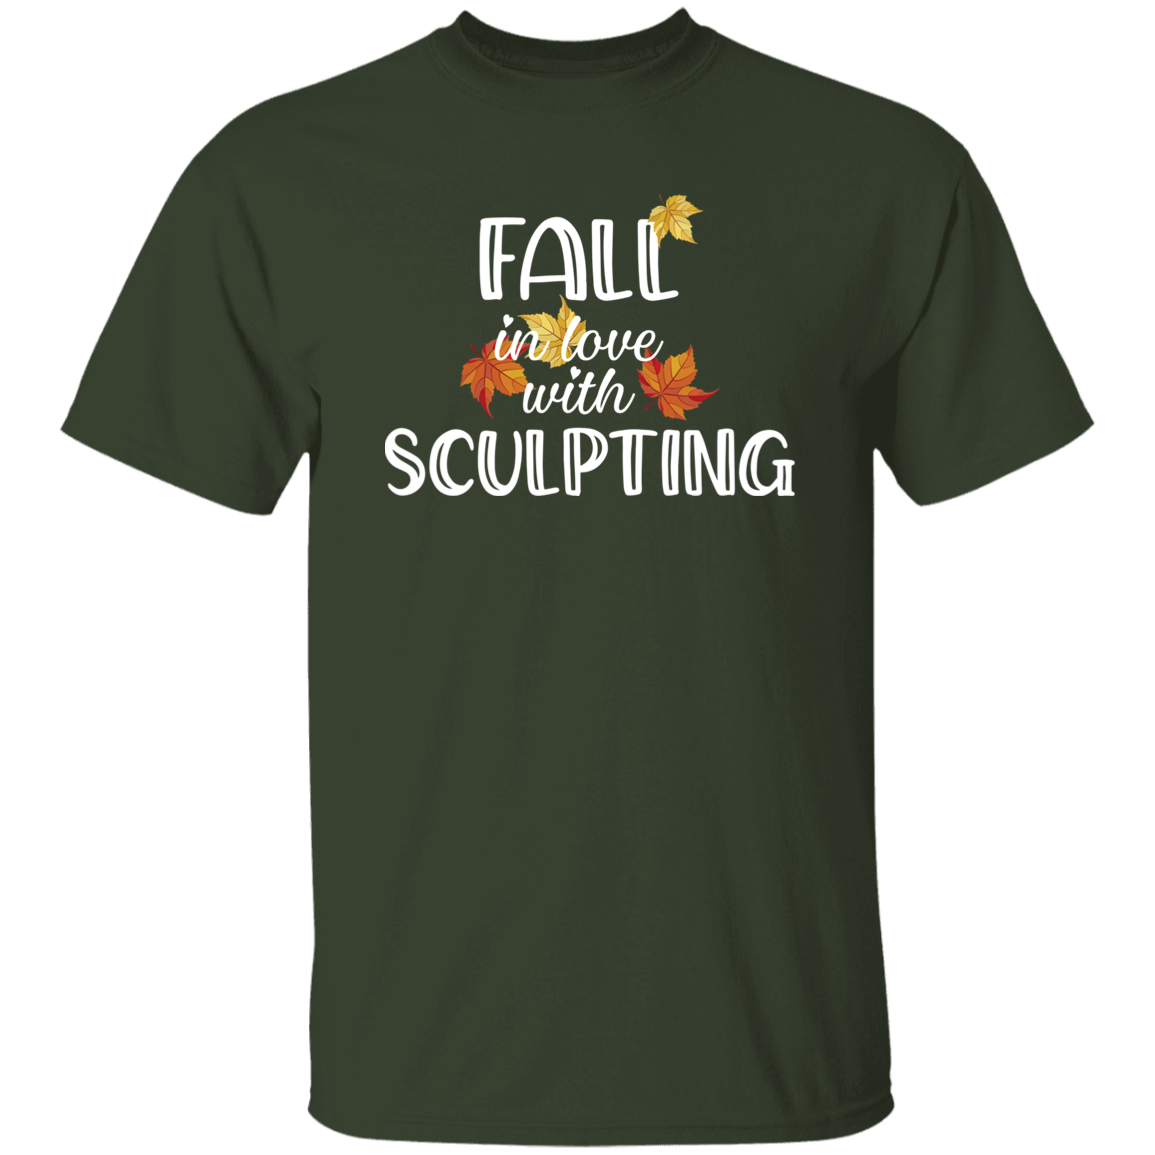 Fall in love with Sculpting T-Shirt